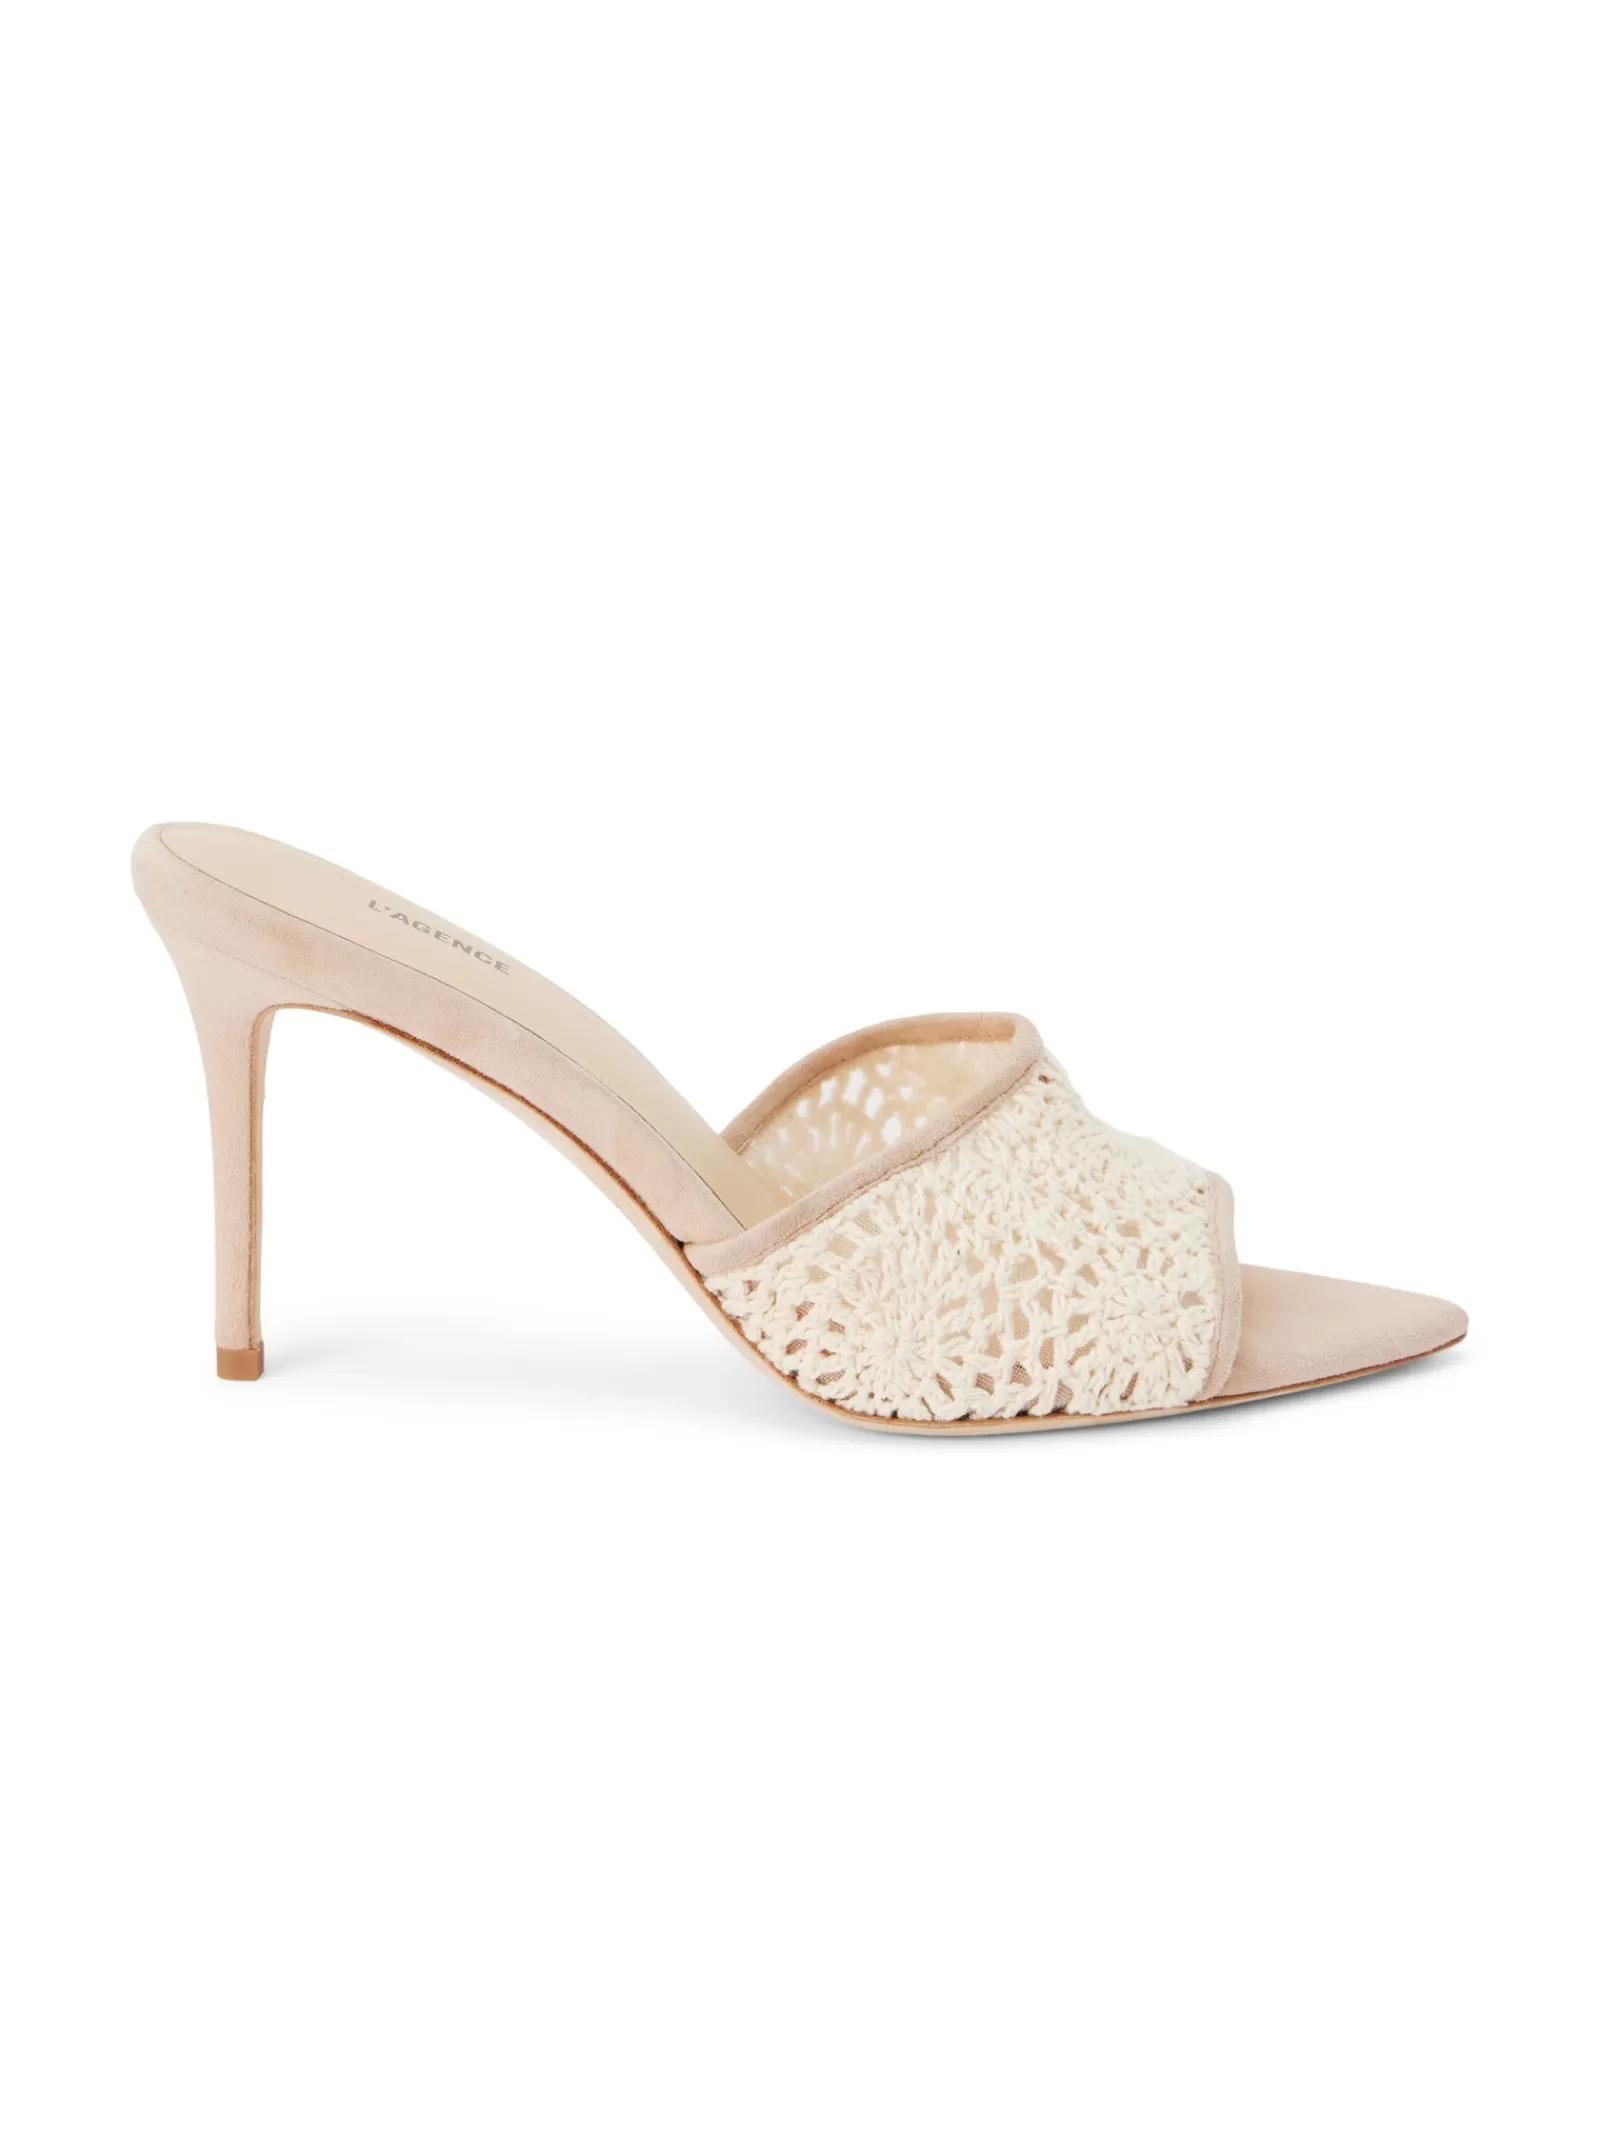 L'AGENCE Armande Crochet Mule< Spring Collection | Mules